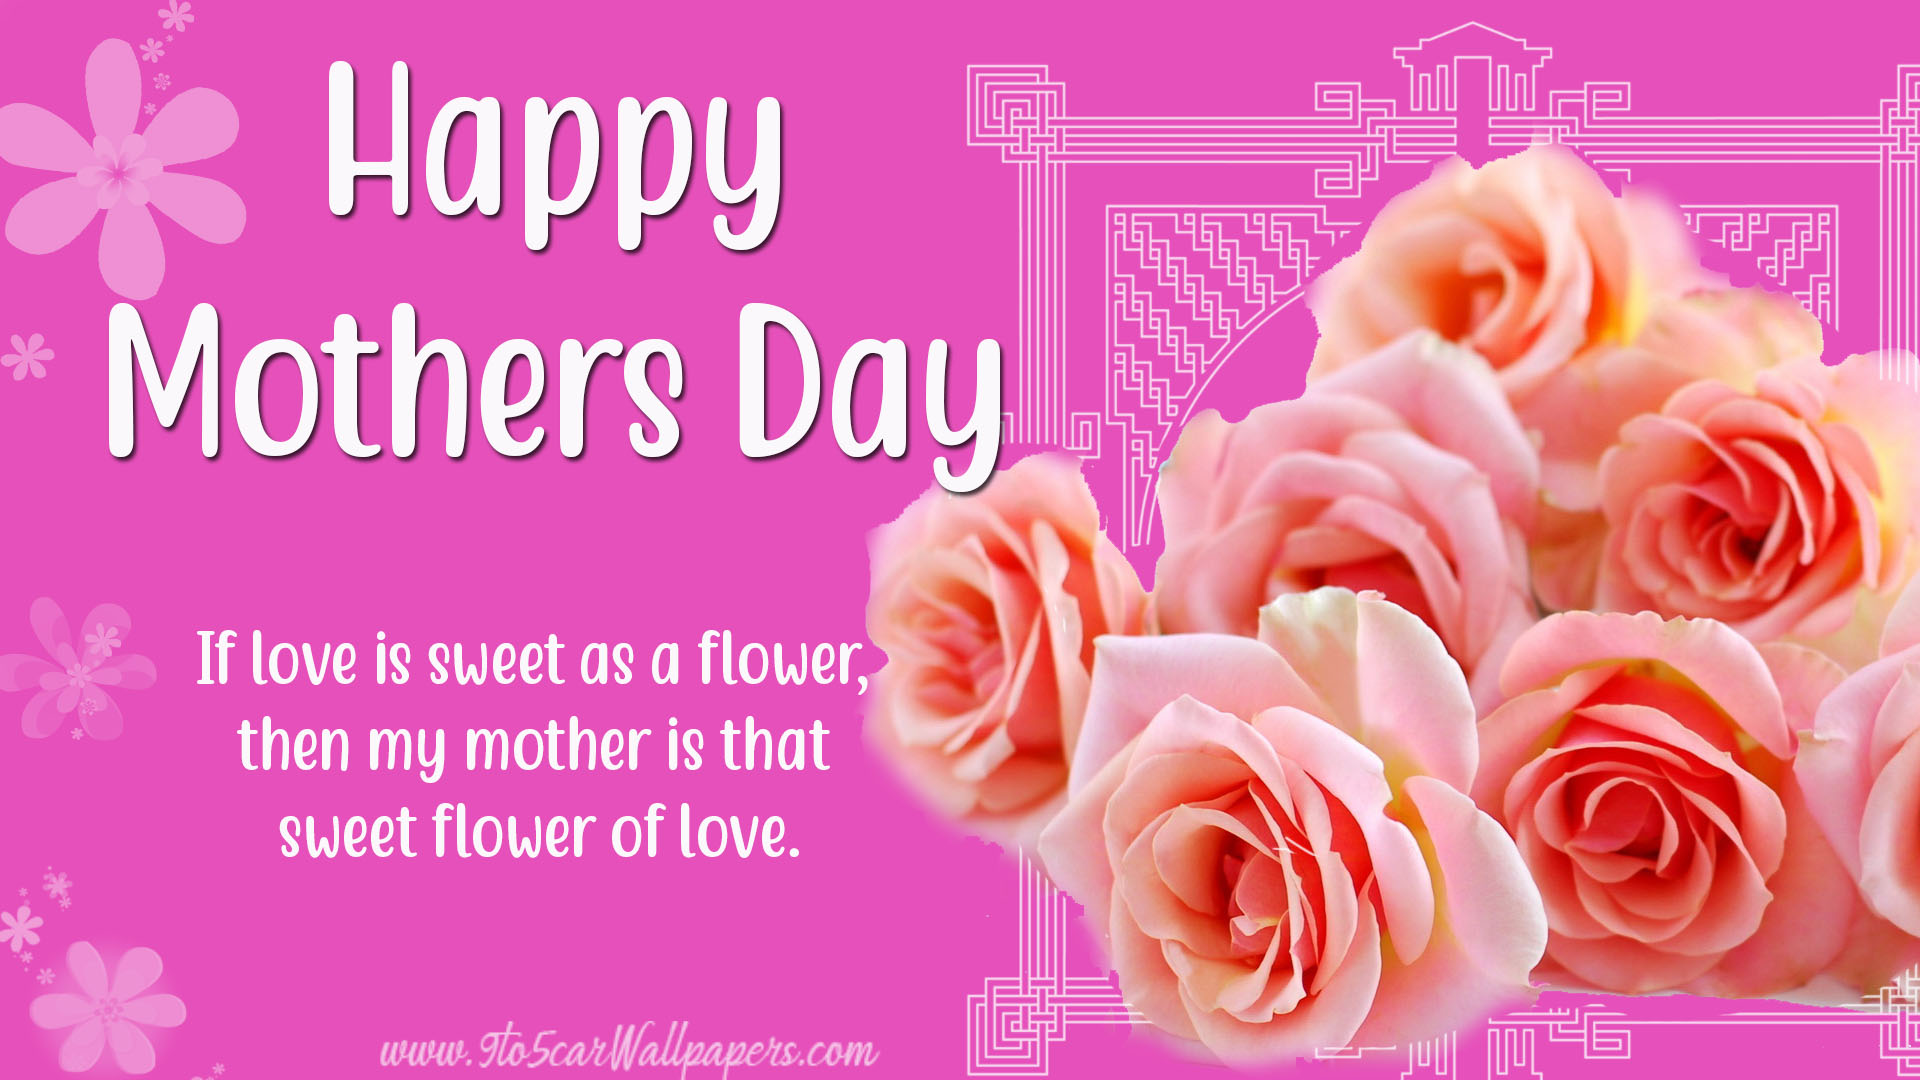 Happy Mothers Day Wishes & Mothers Day Inspirational Quotes